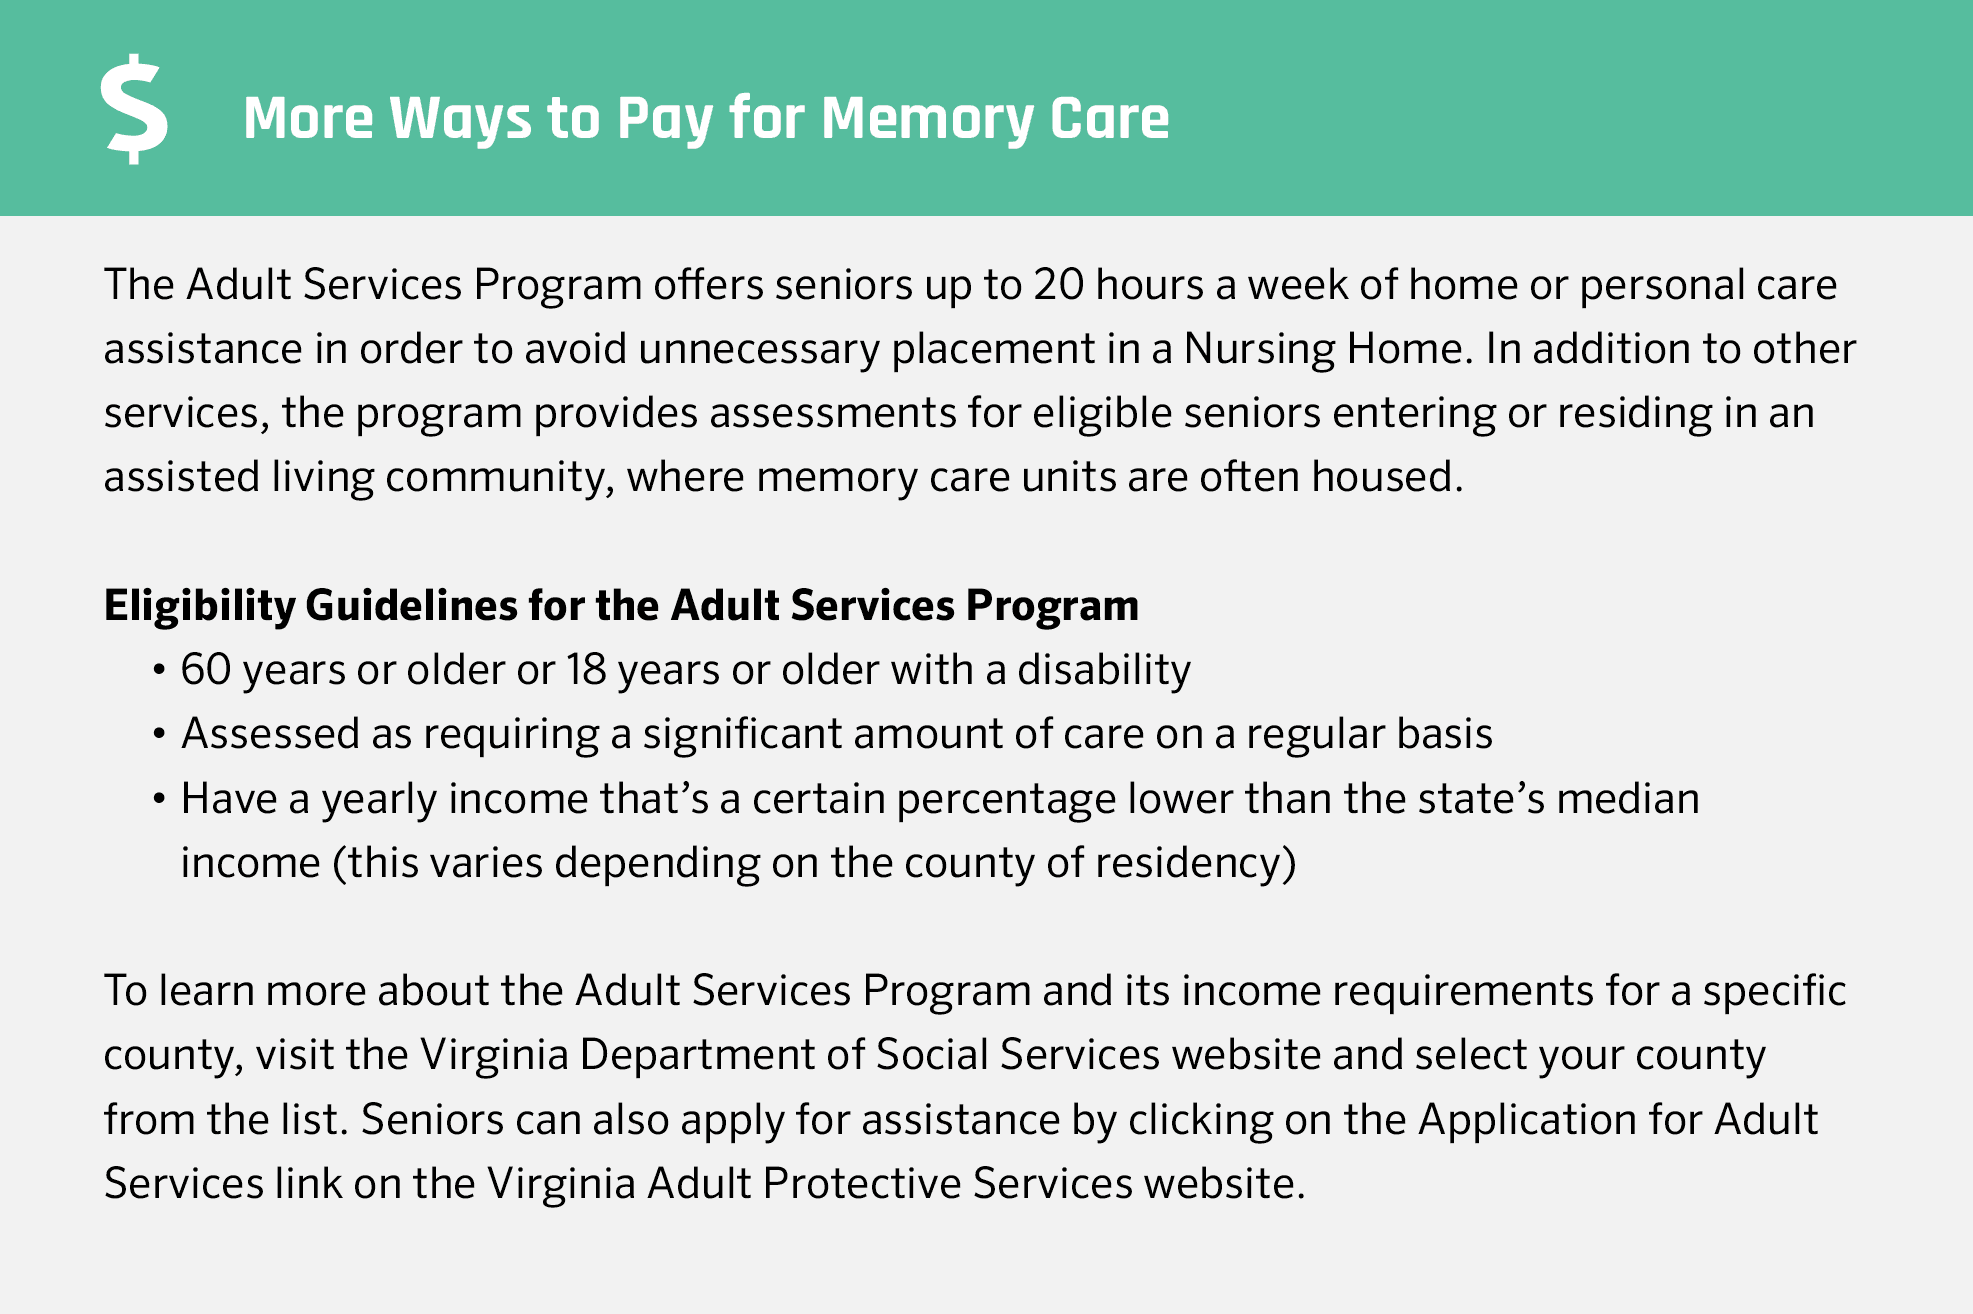 Financial Assistance for Memory Care in Virginia 